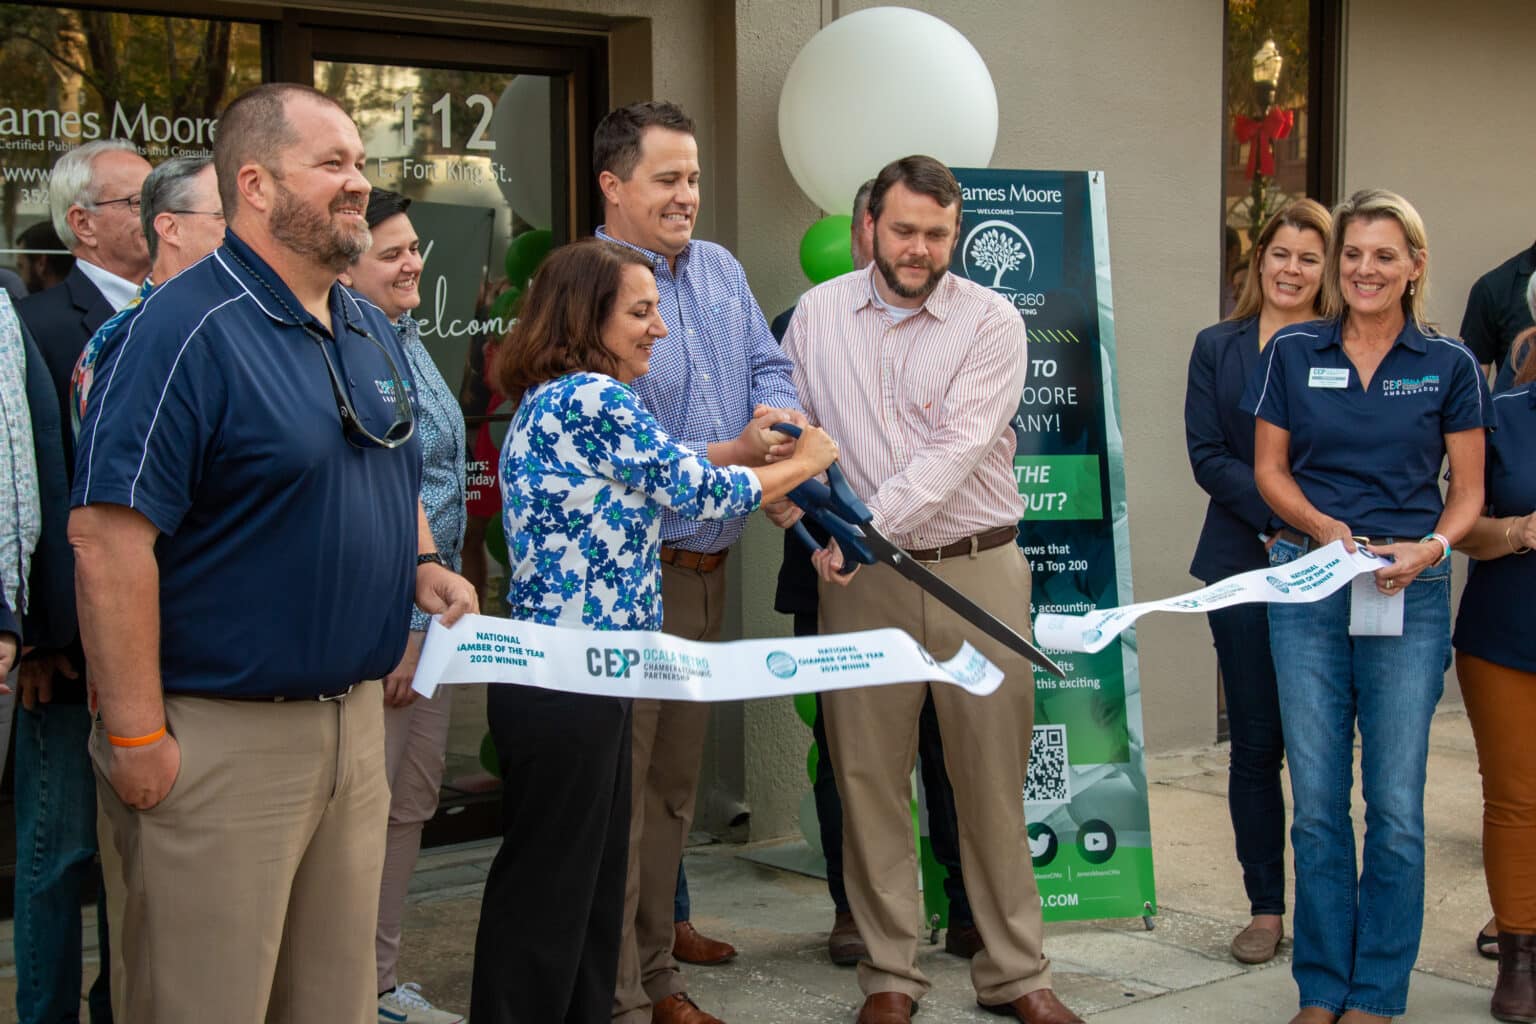 Ribbon cutting ceremony at the new James Moore Ocala office location, merging with CANOPY 360.